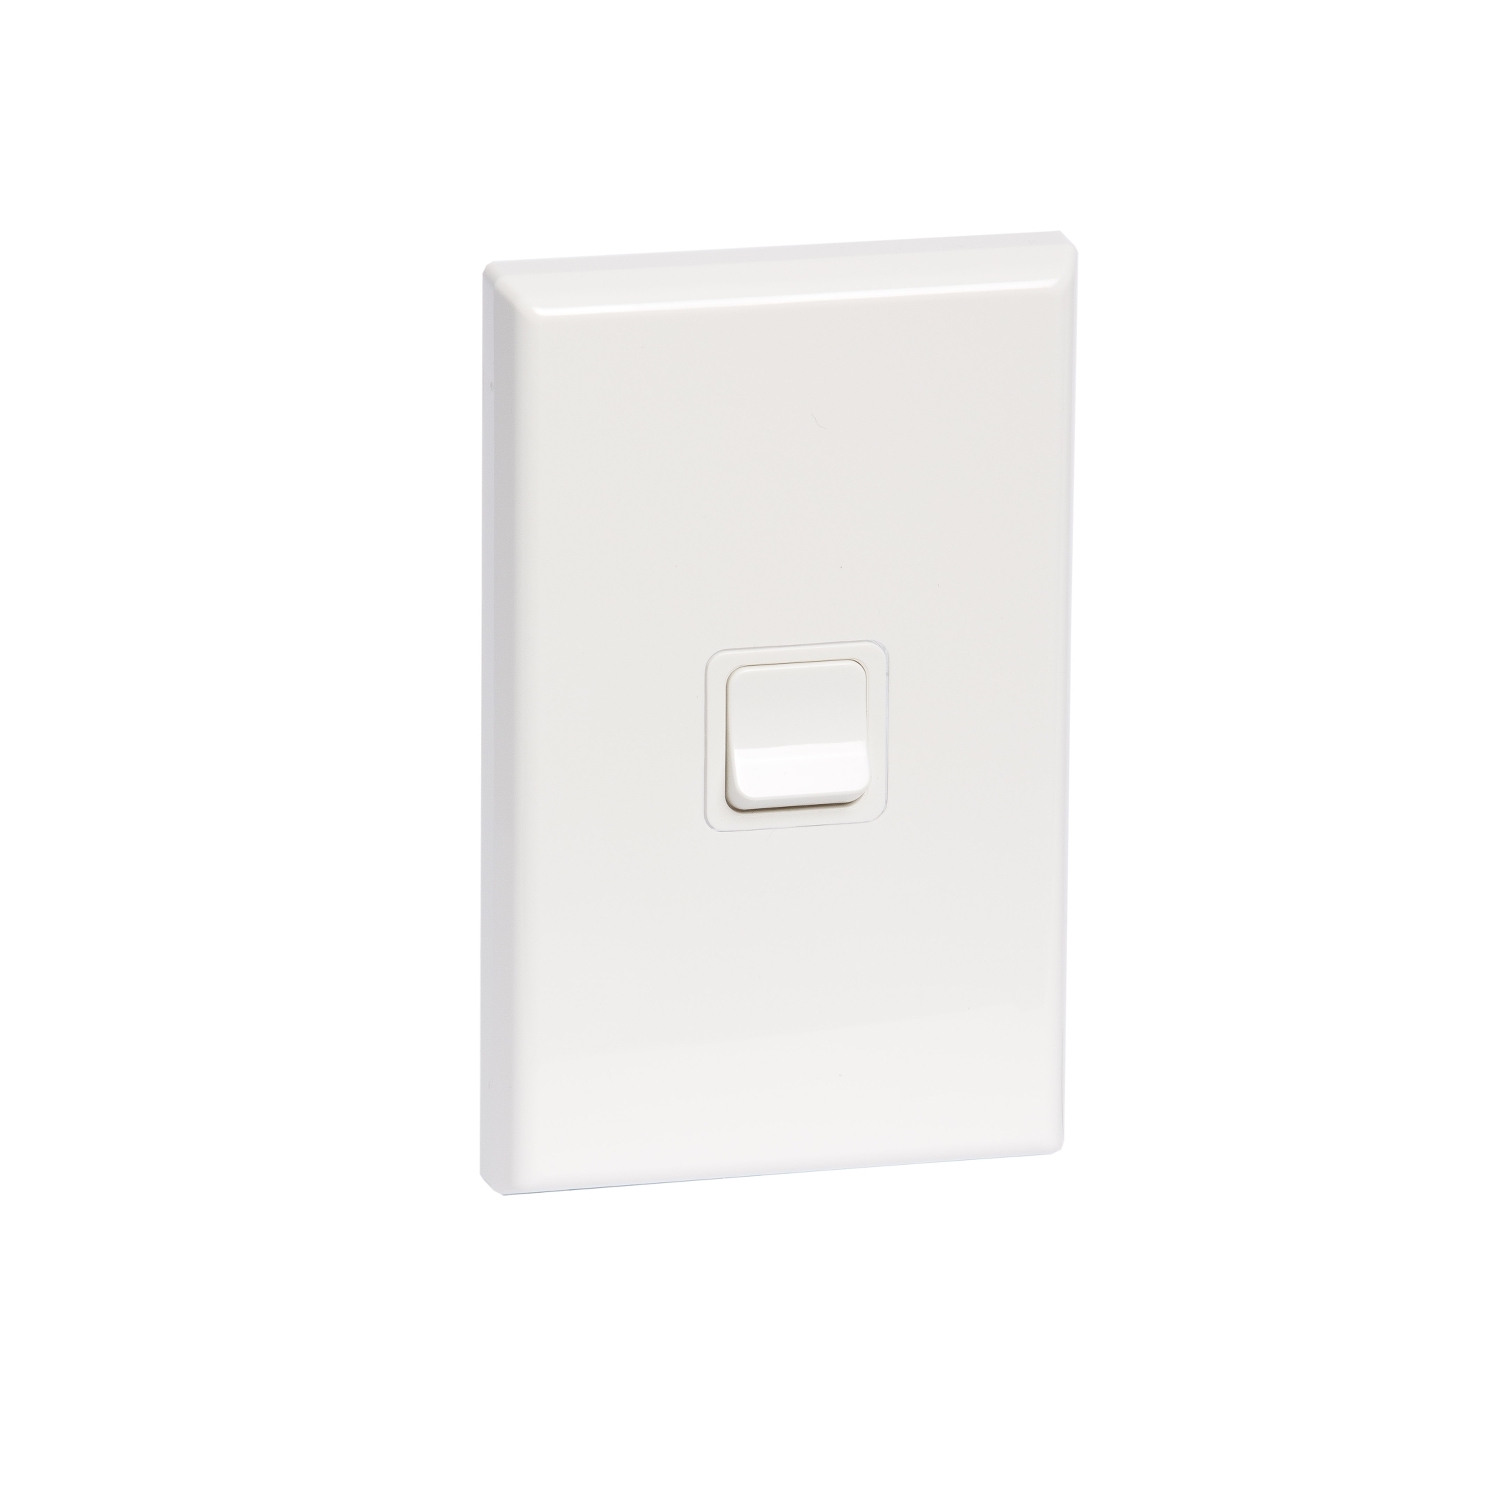 PDL681WH - PDL 600 Series Switch, Assembled, Vertical, 1-gang, 250 V, 20 A / 16 AX - White